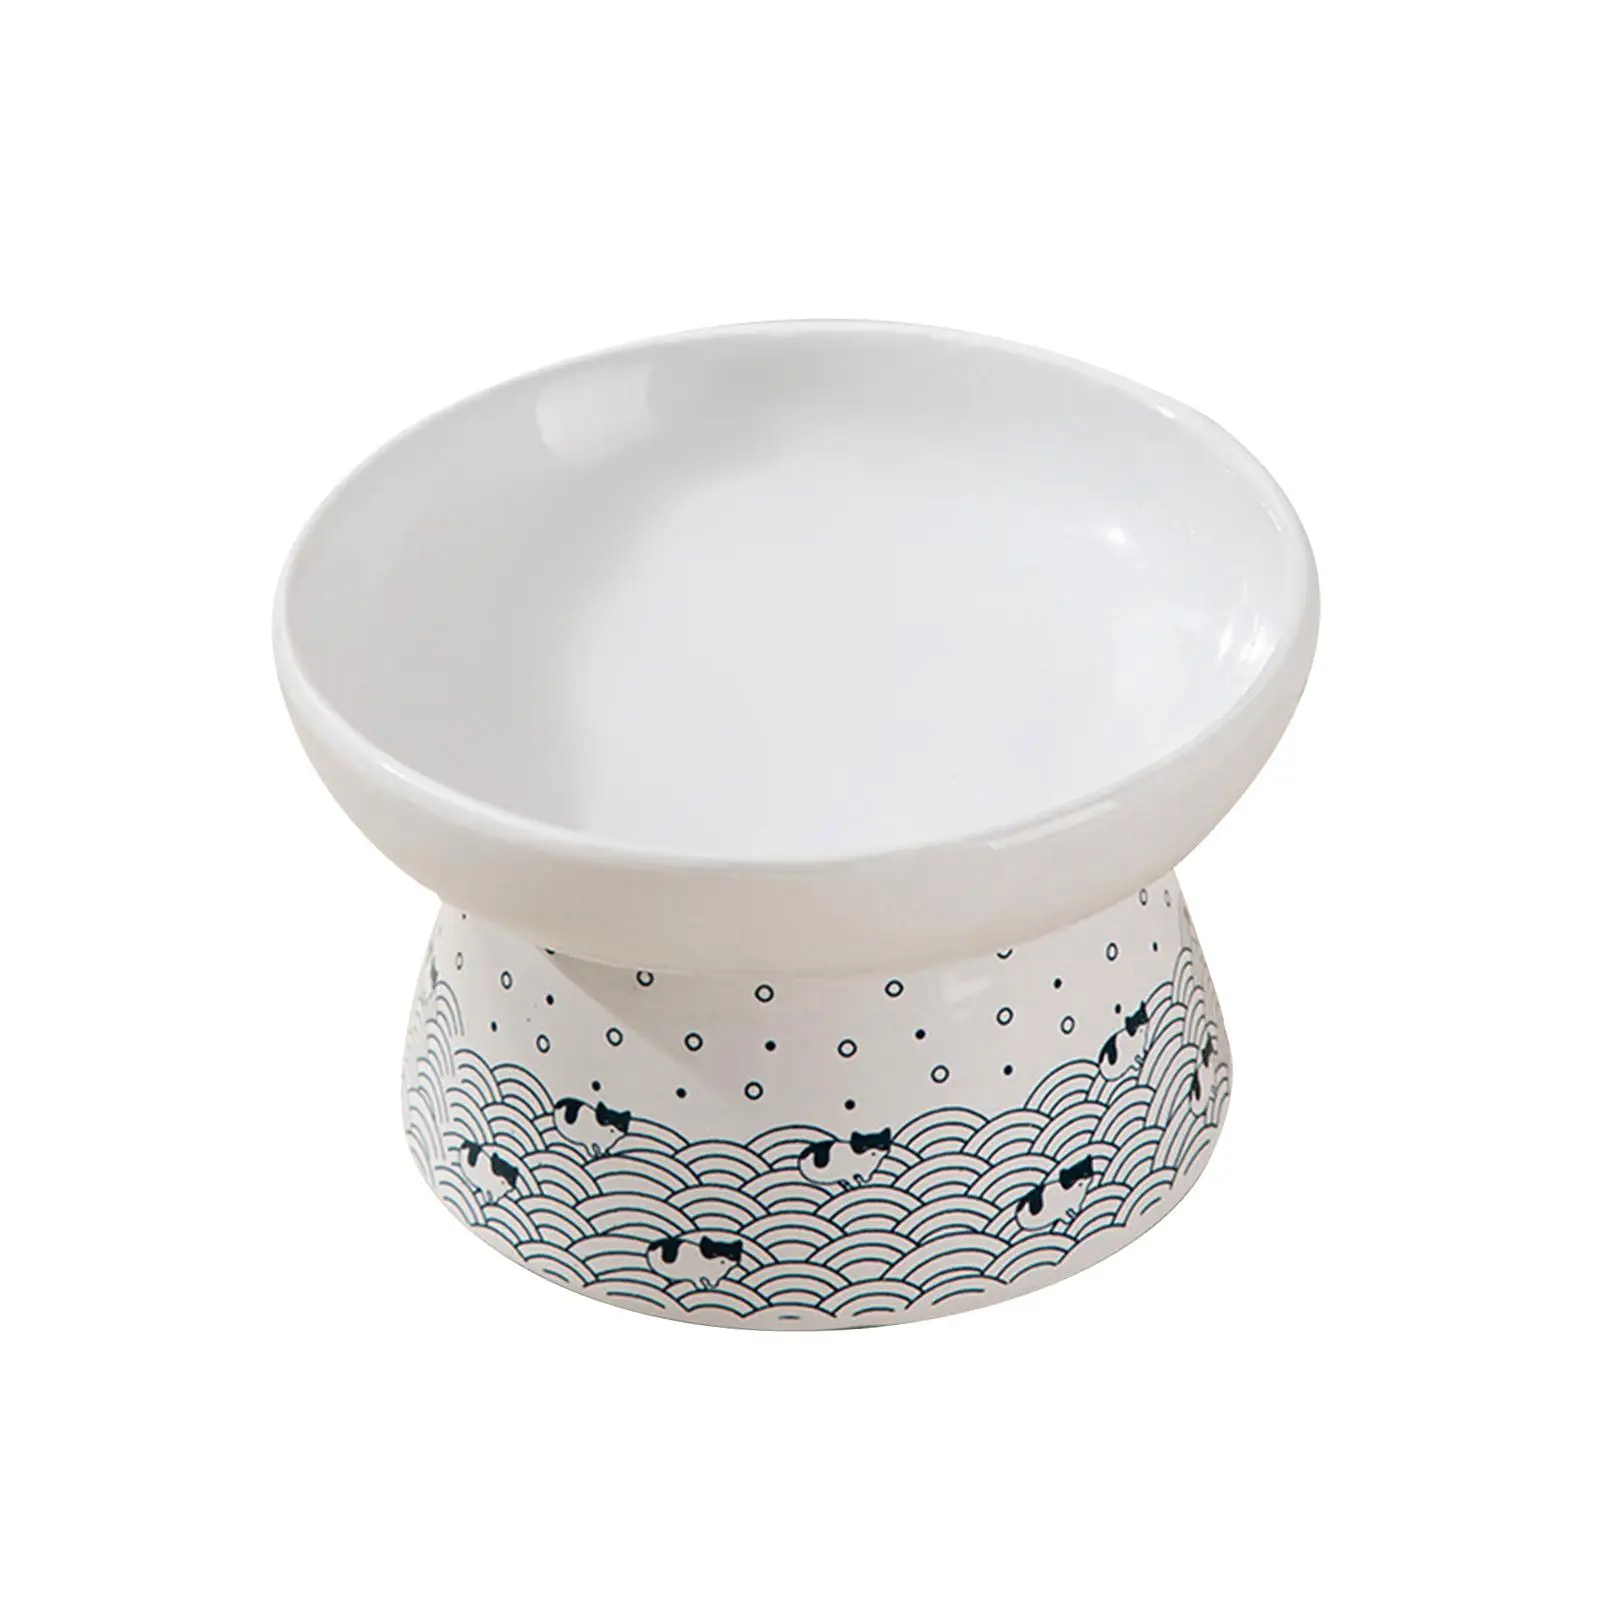 Ceramic Elevated Cat Feeder Bowl Dish Accessory Durable Porcelain Bowl